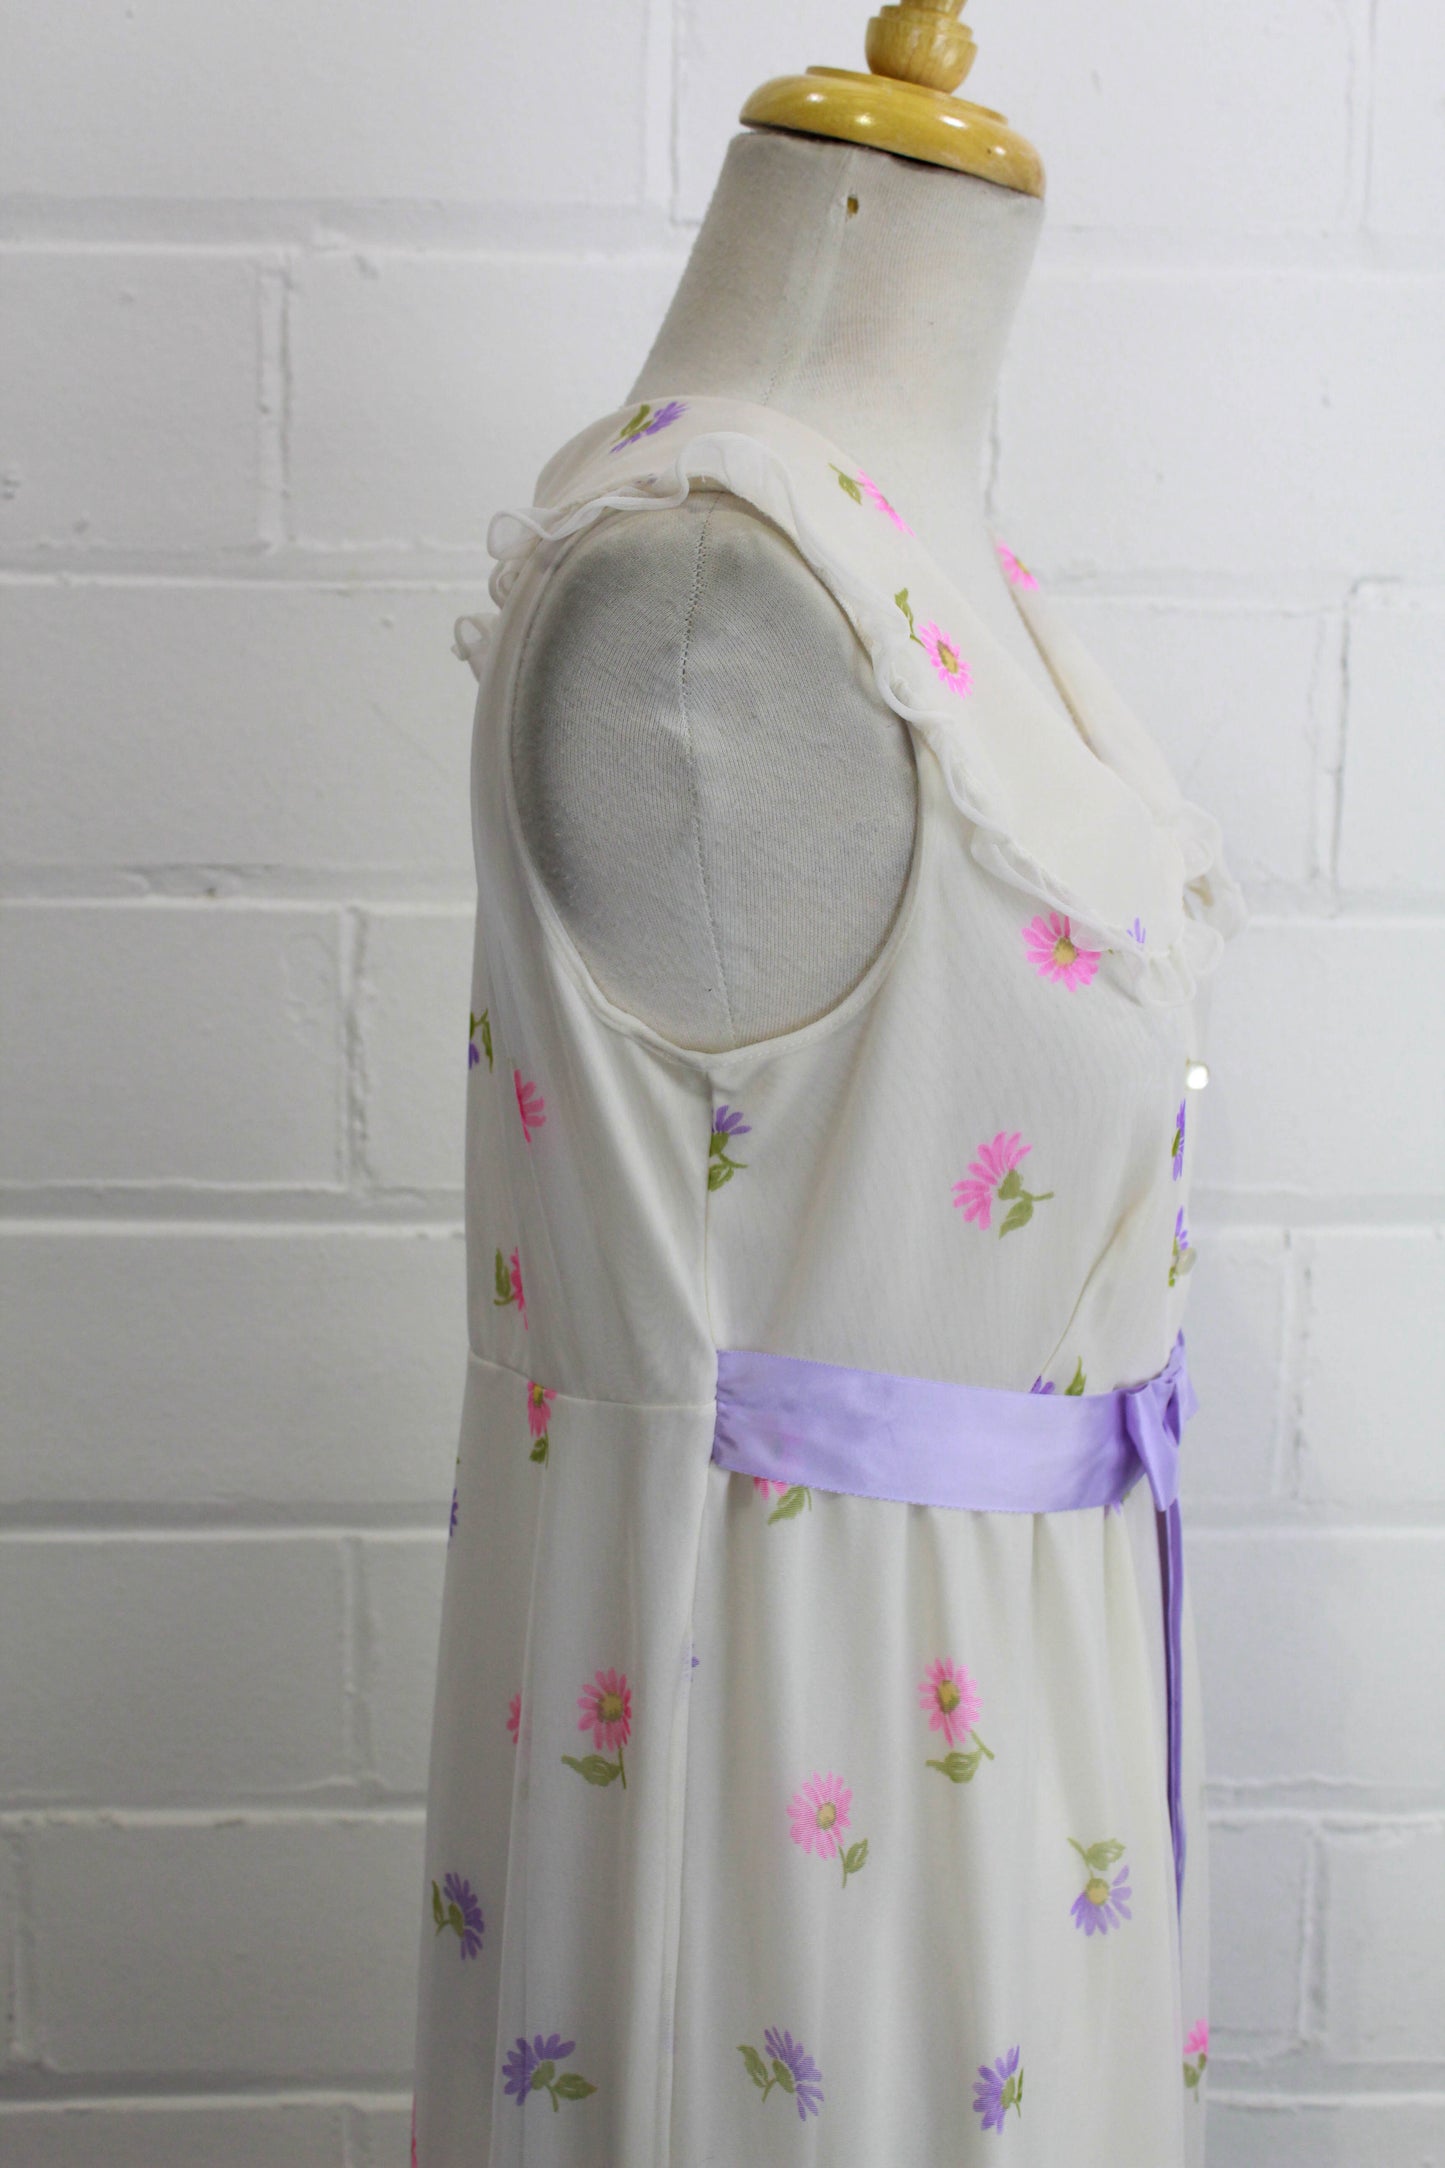 1960s/70s Maxi Dress, White Chiffon with Lilac and Pink Floral Print